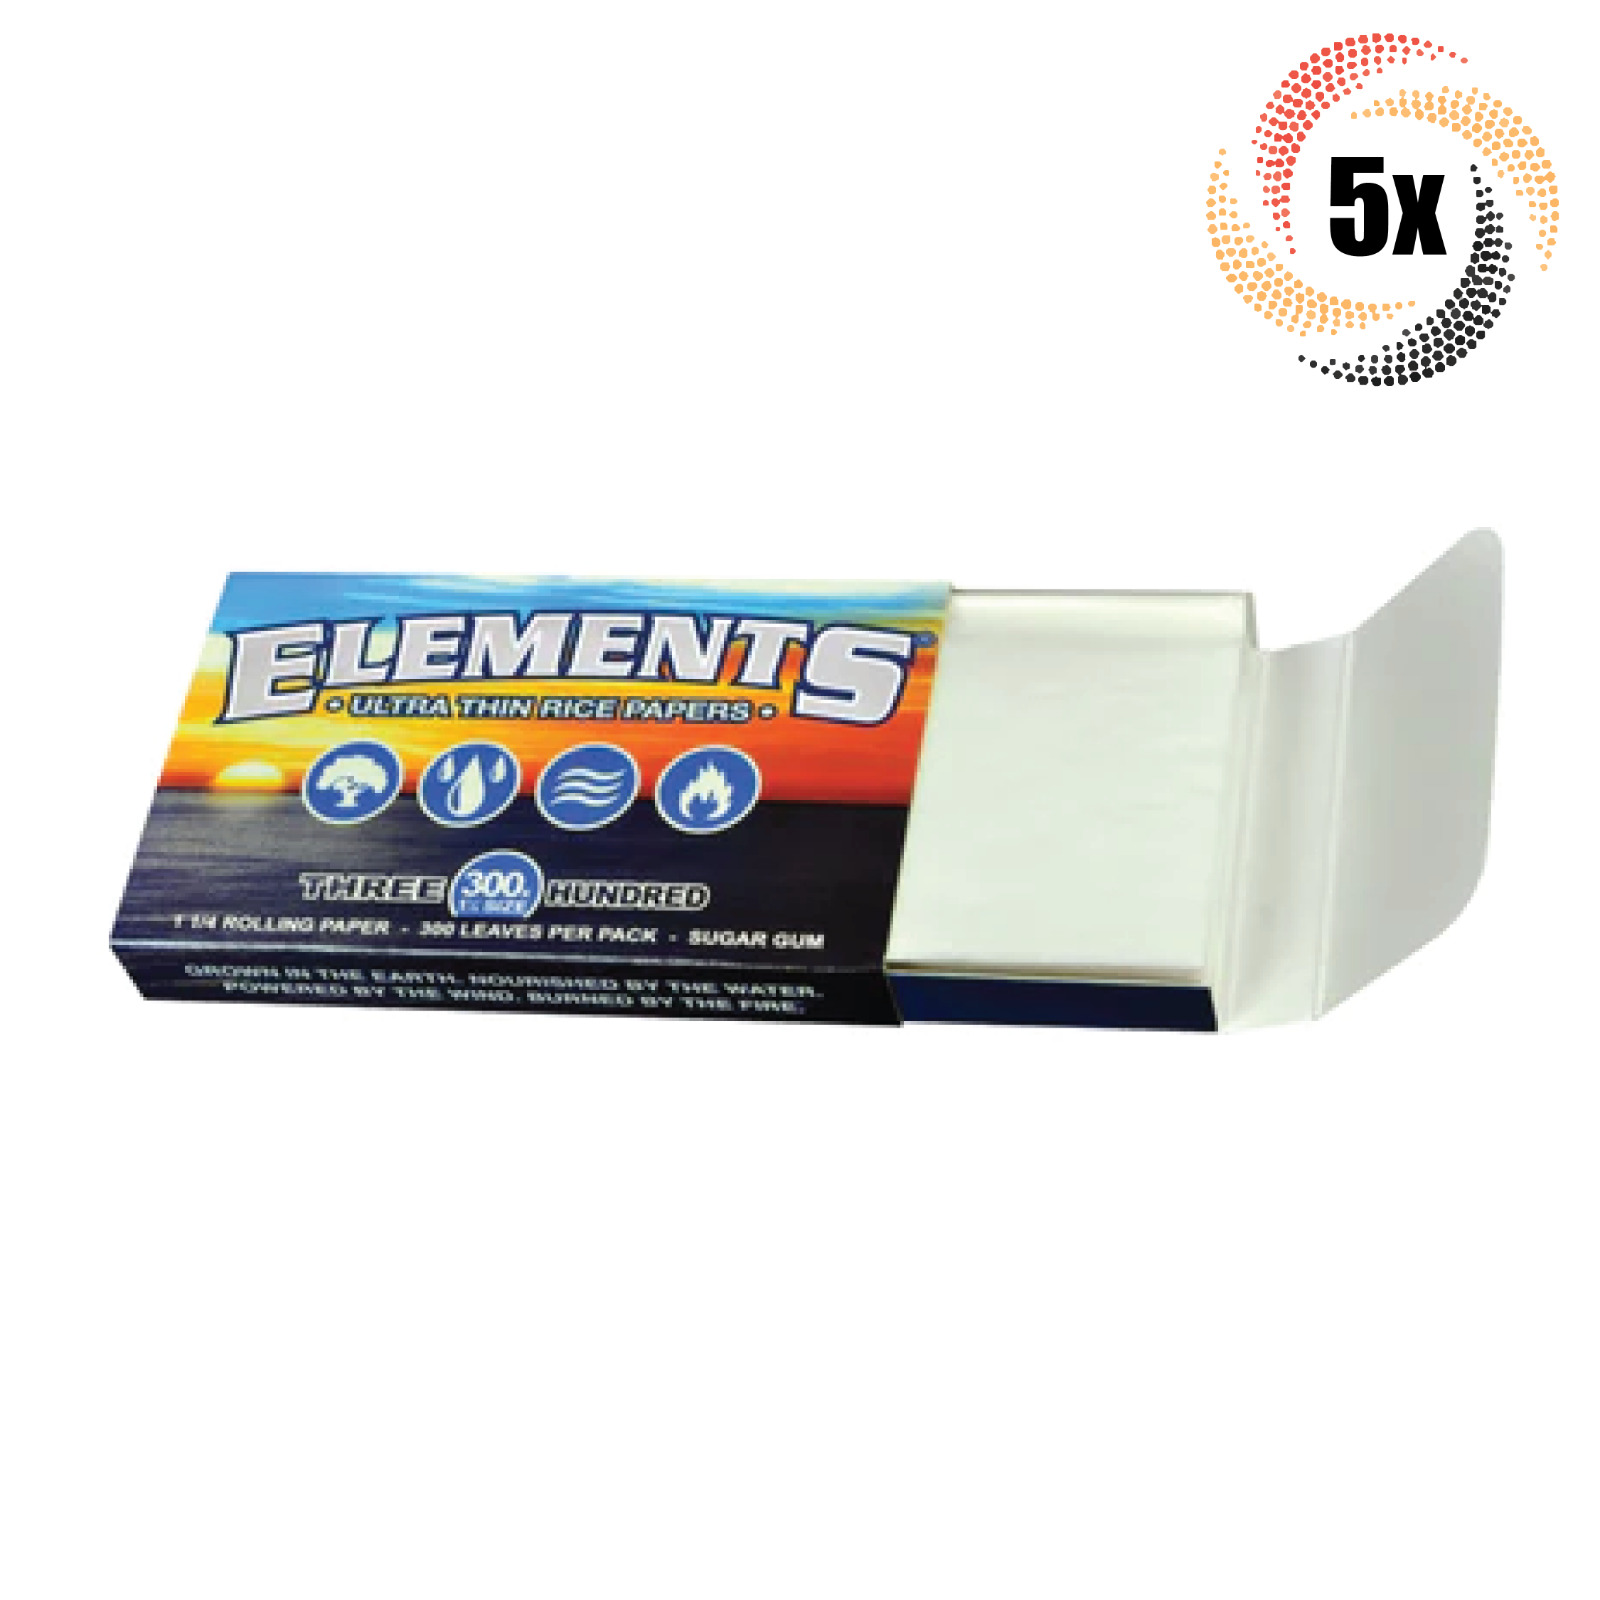 5x Packs Elements 300\'s 1 1/4 1.25 ( 300 Paper Packs ) + 2 Free Rolling Tubes